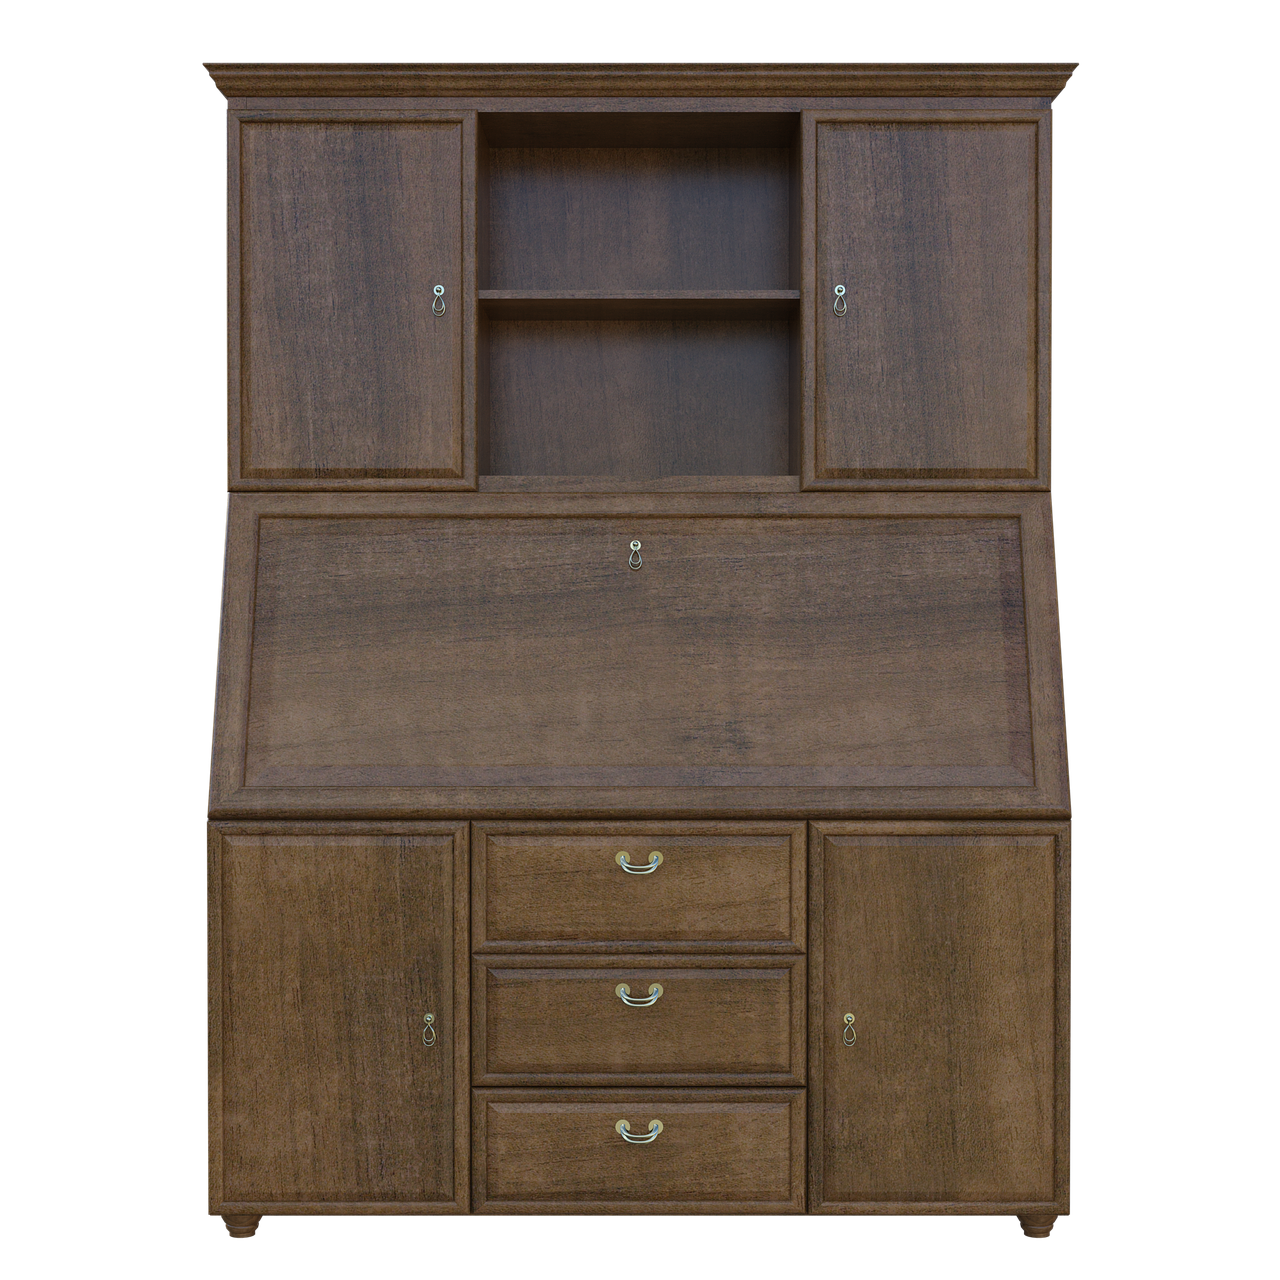 cabinet  old  wooden free photo